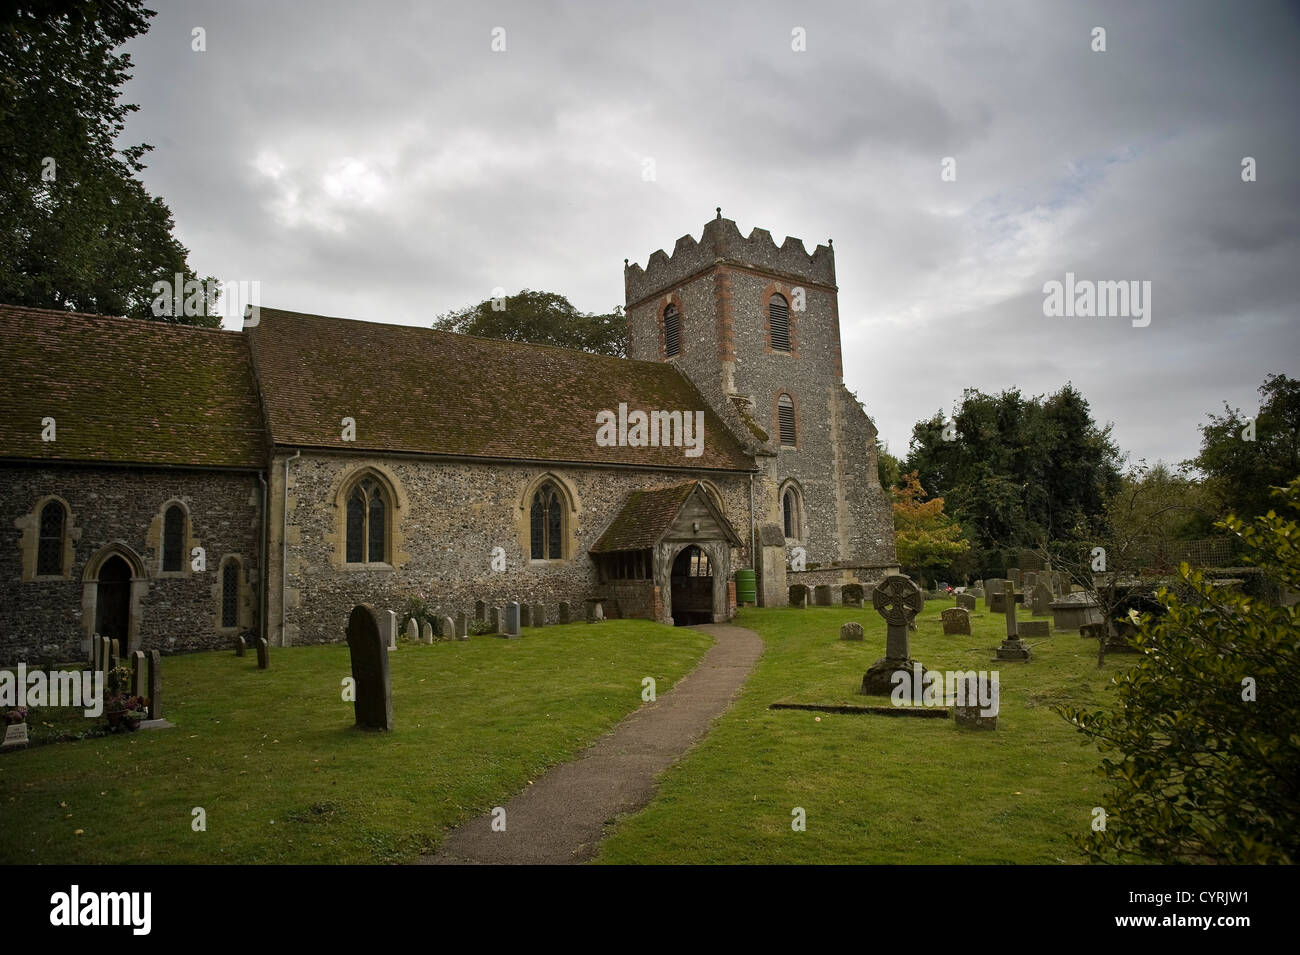 The Church of St Mary the Virgin, North Stoke on the Ridgeway National Trail, Oxfordshire, UK Stock Photo